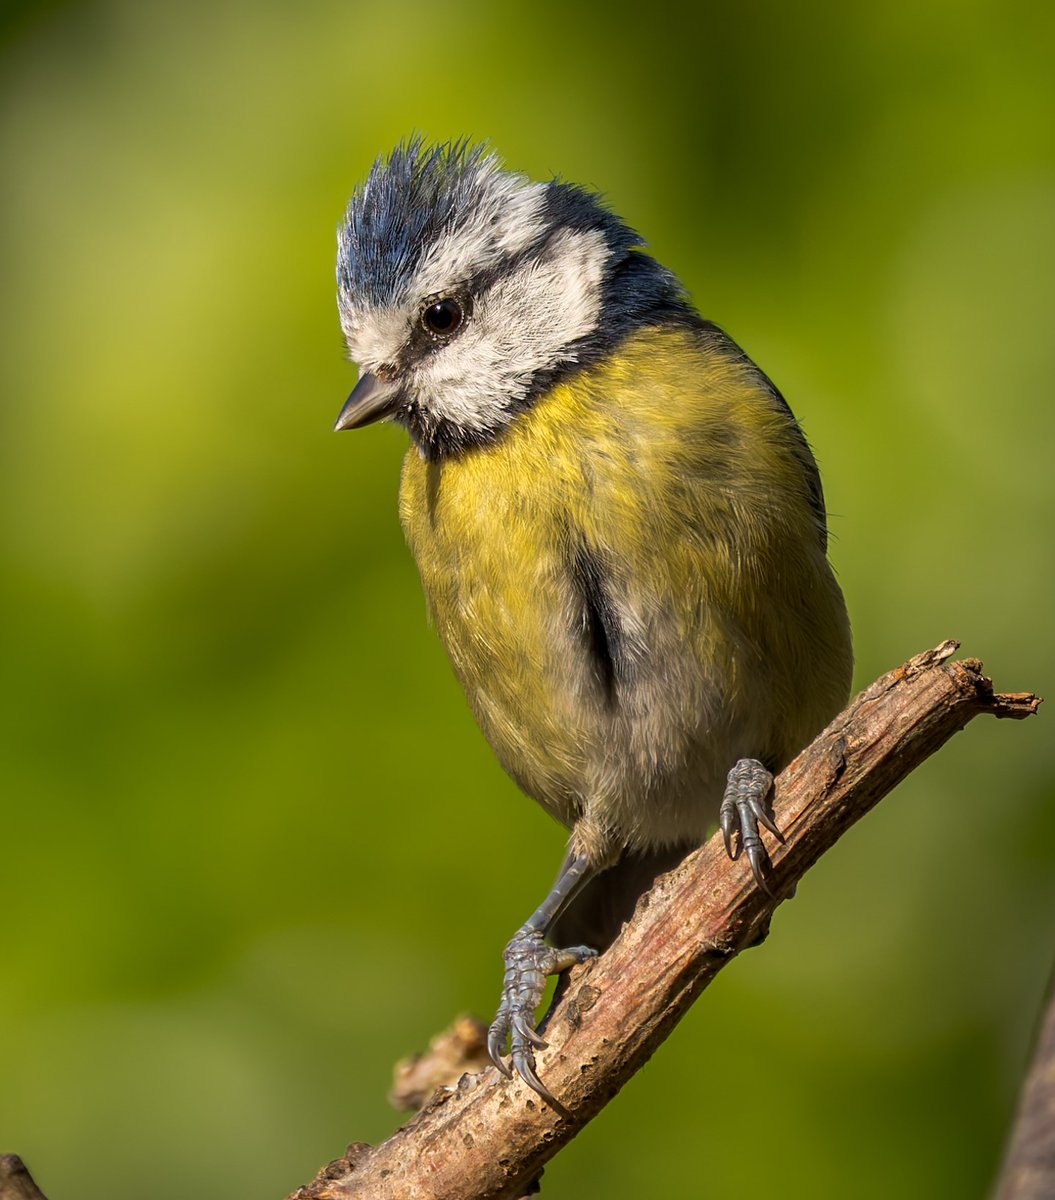 Another beautiful day ~ the Blue Tits are constantly back forth to the feeders collecting food to take back to the nests, captured this shot in glorious light #TwitterNaturePhotography #BirdsOfTwitter @Natures_Voice @RSPBCymru @Birds_UK